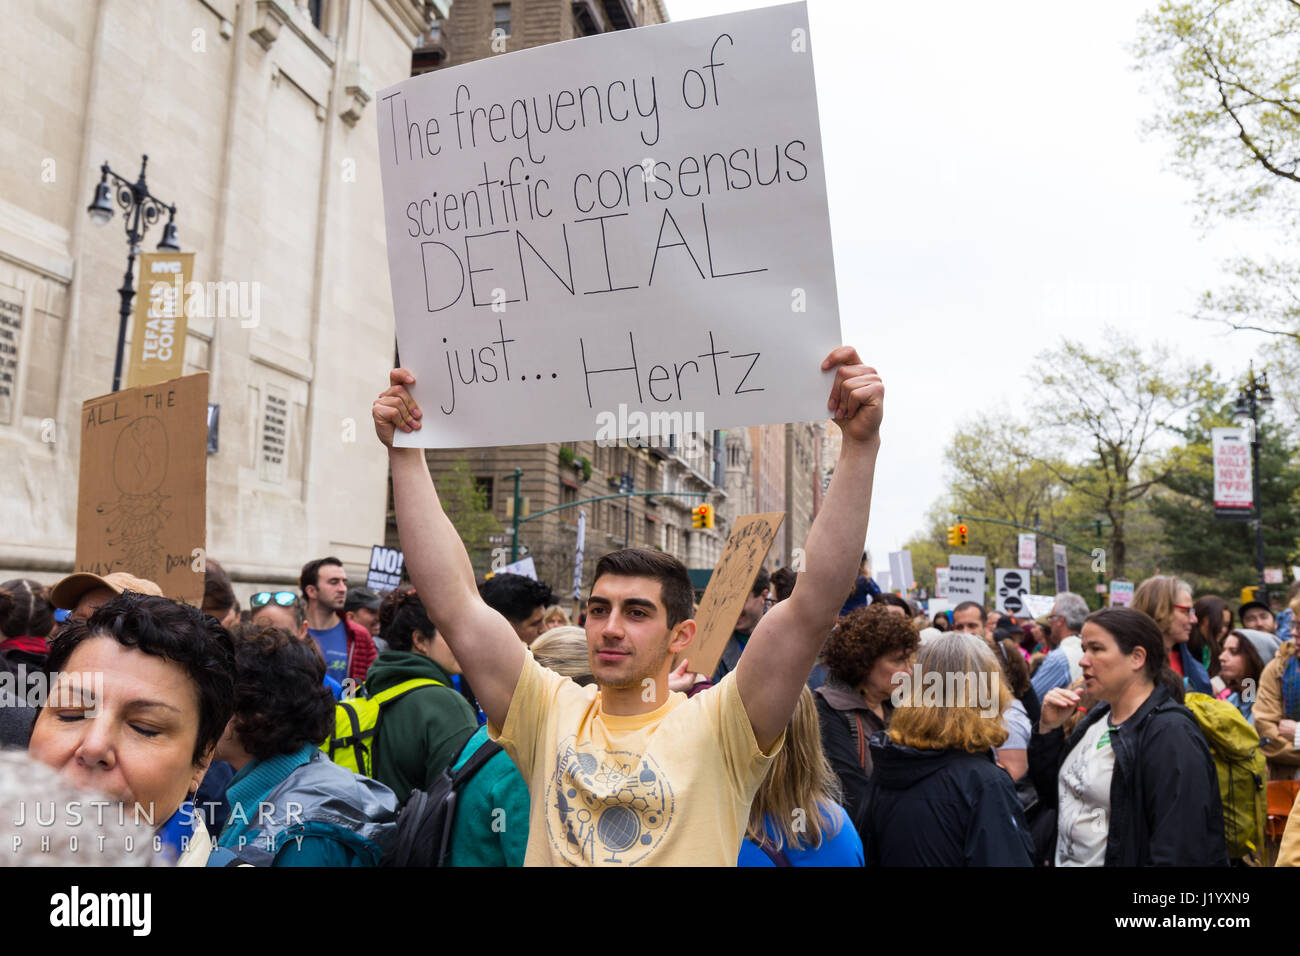 New York, USA. 22nd April, 2017. An unidentified man holds a sign that reads 'The frequency of scientific DENIAL just... Hertz' during the March For Science on April 22, 2017 in New York. Credit: Justin Starr/Alamy Live News Stock Photo